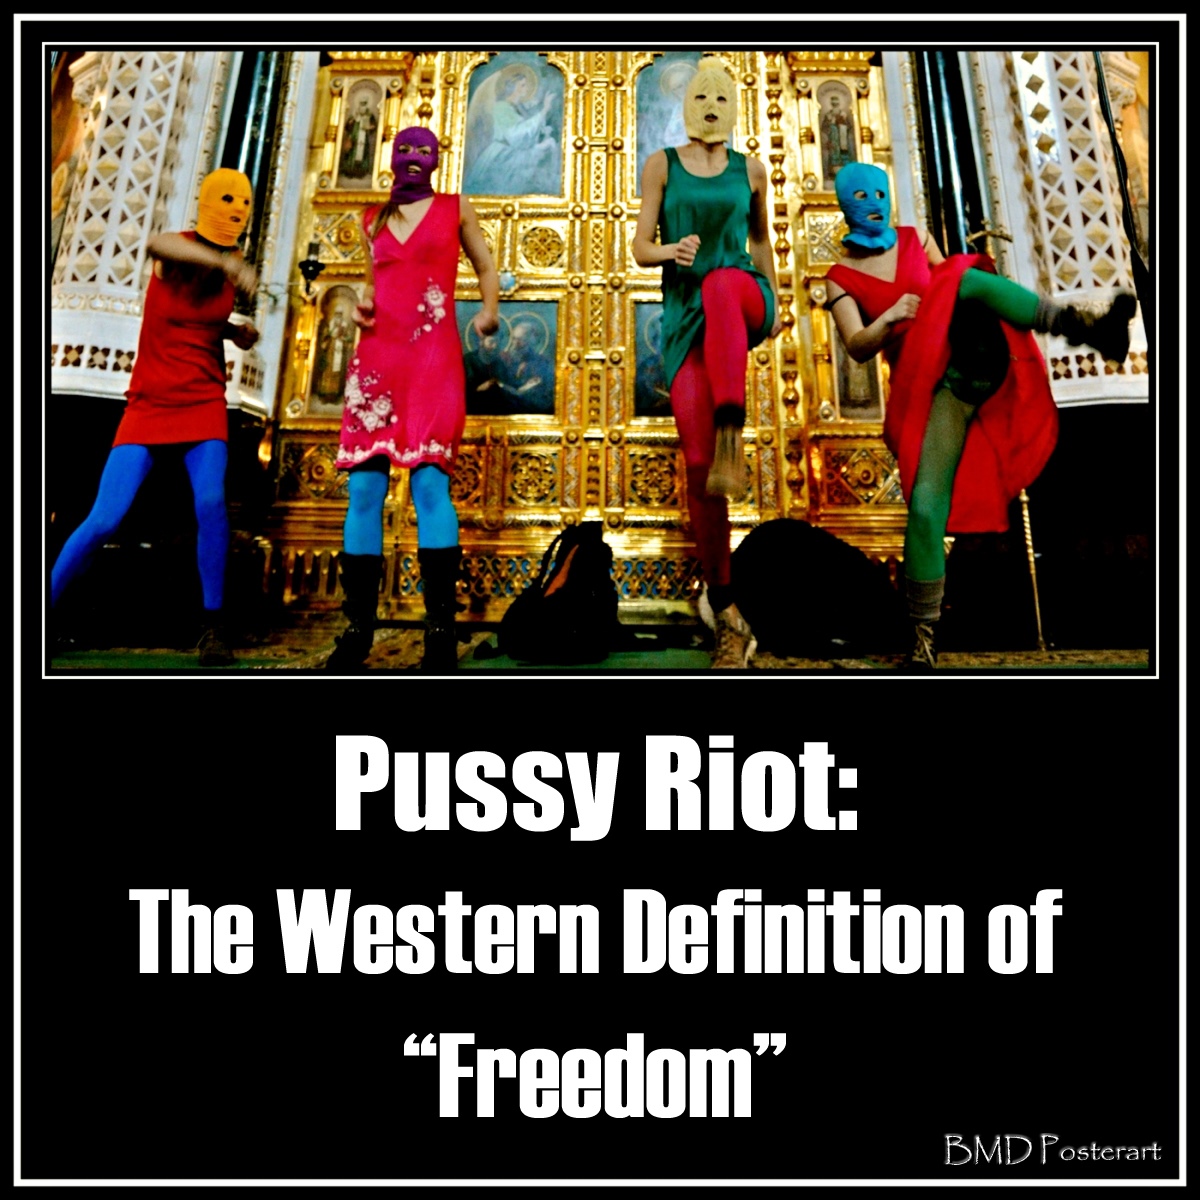 00 Pussy Riot. The Western Standard of Freedom. 14.06.14